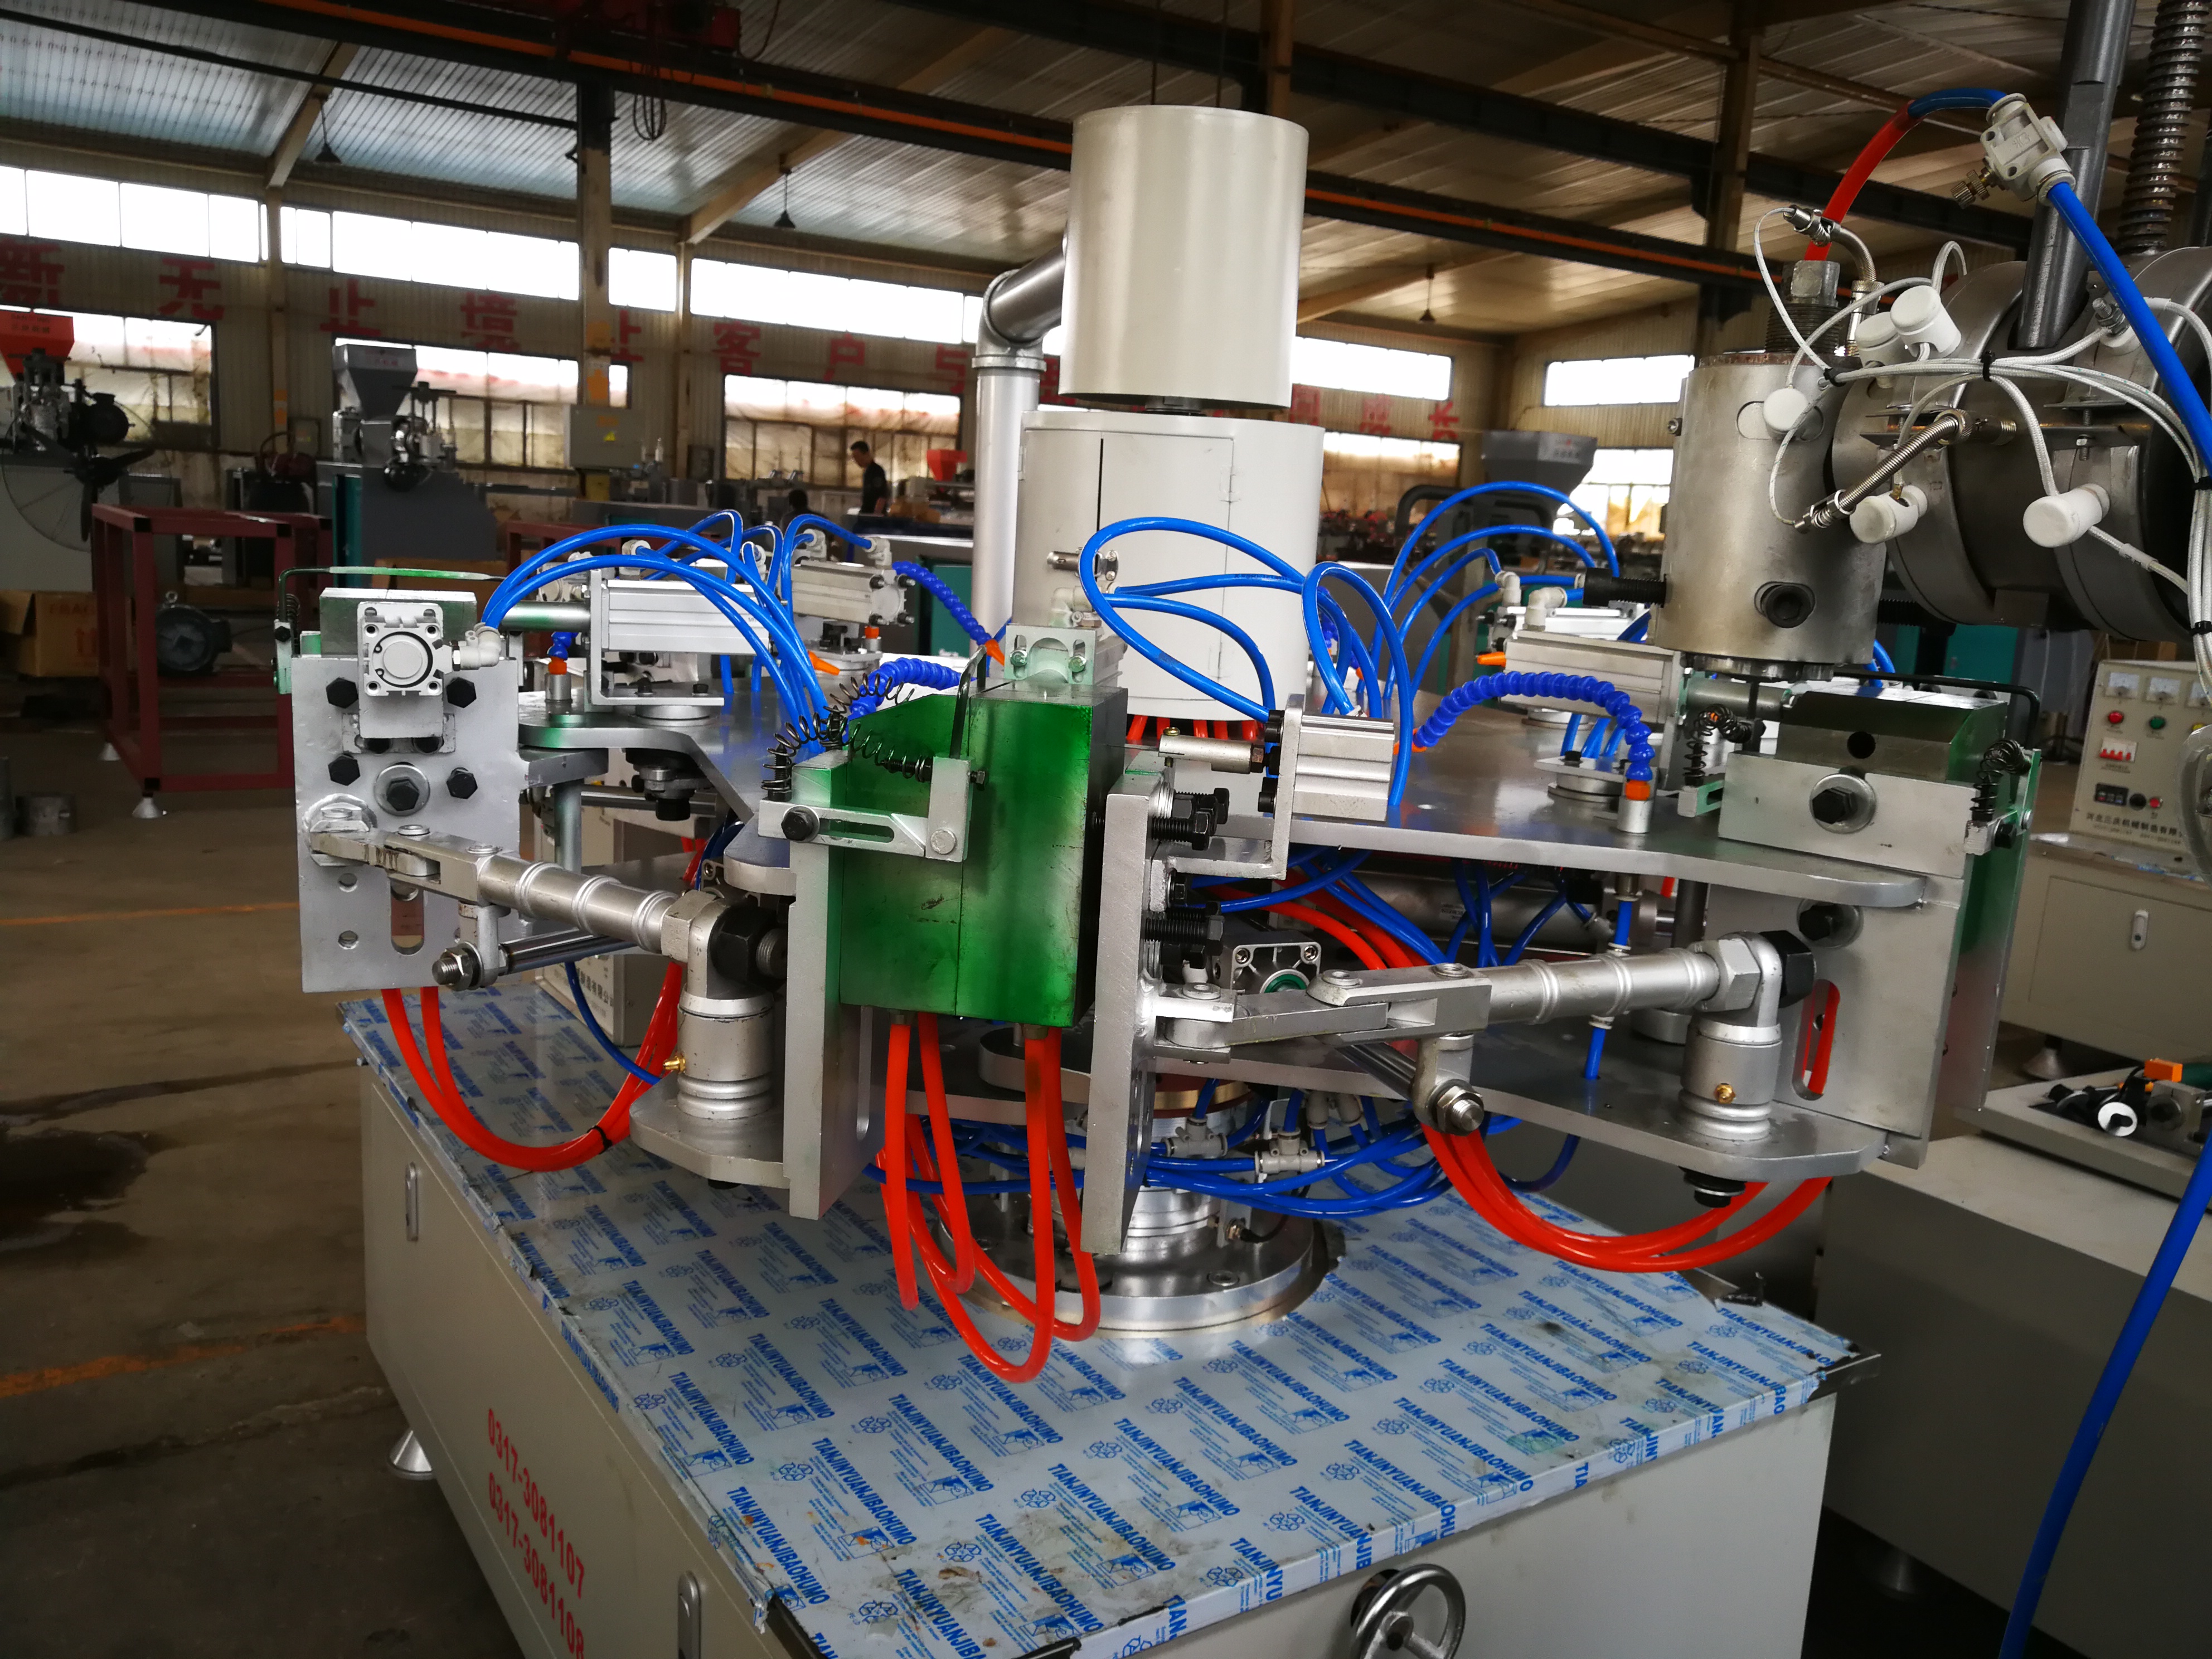 Ice Lolly Soft Bottle Six Station Ice Lolly Tube LDPE Ice Pop Bottle Extrusion Blowing Molding Machine